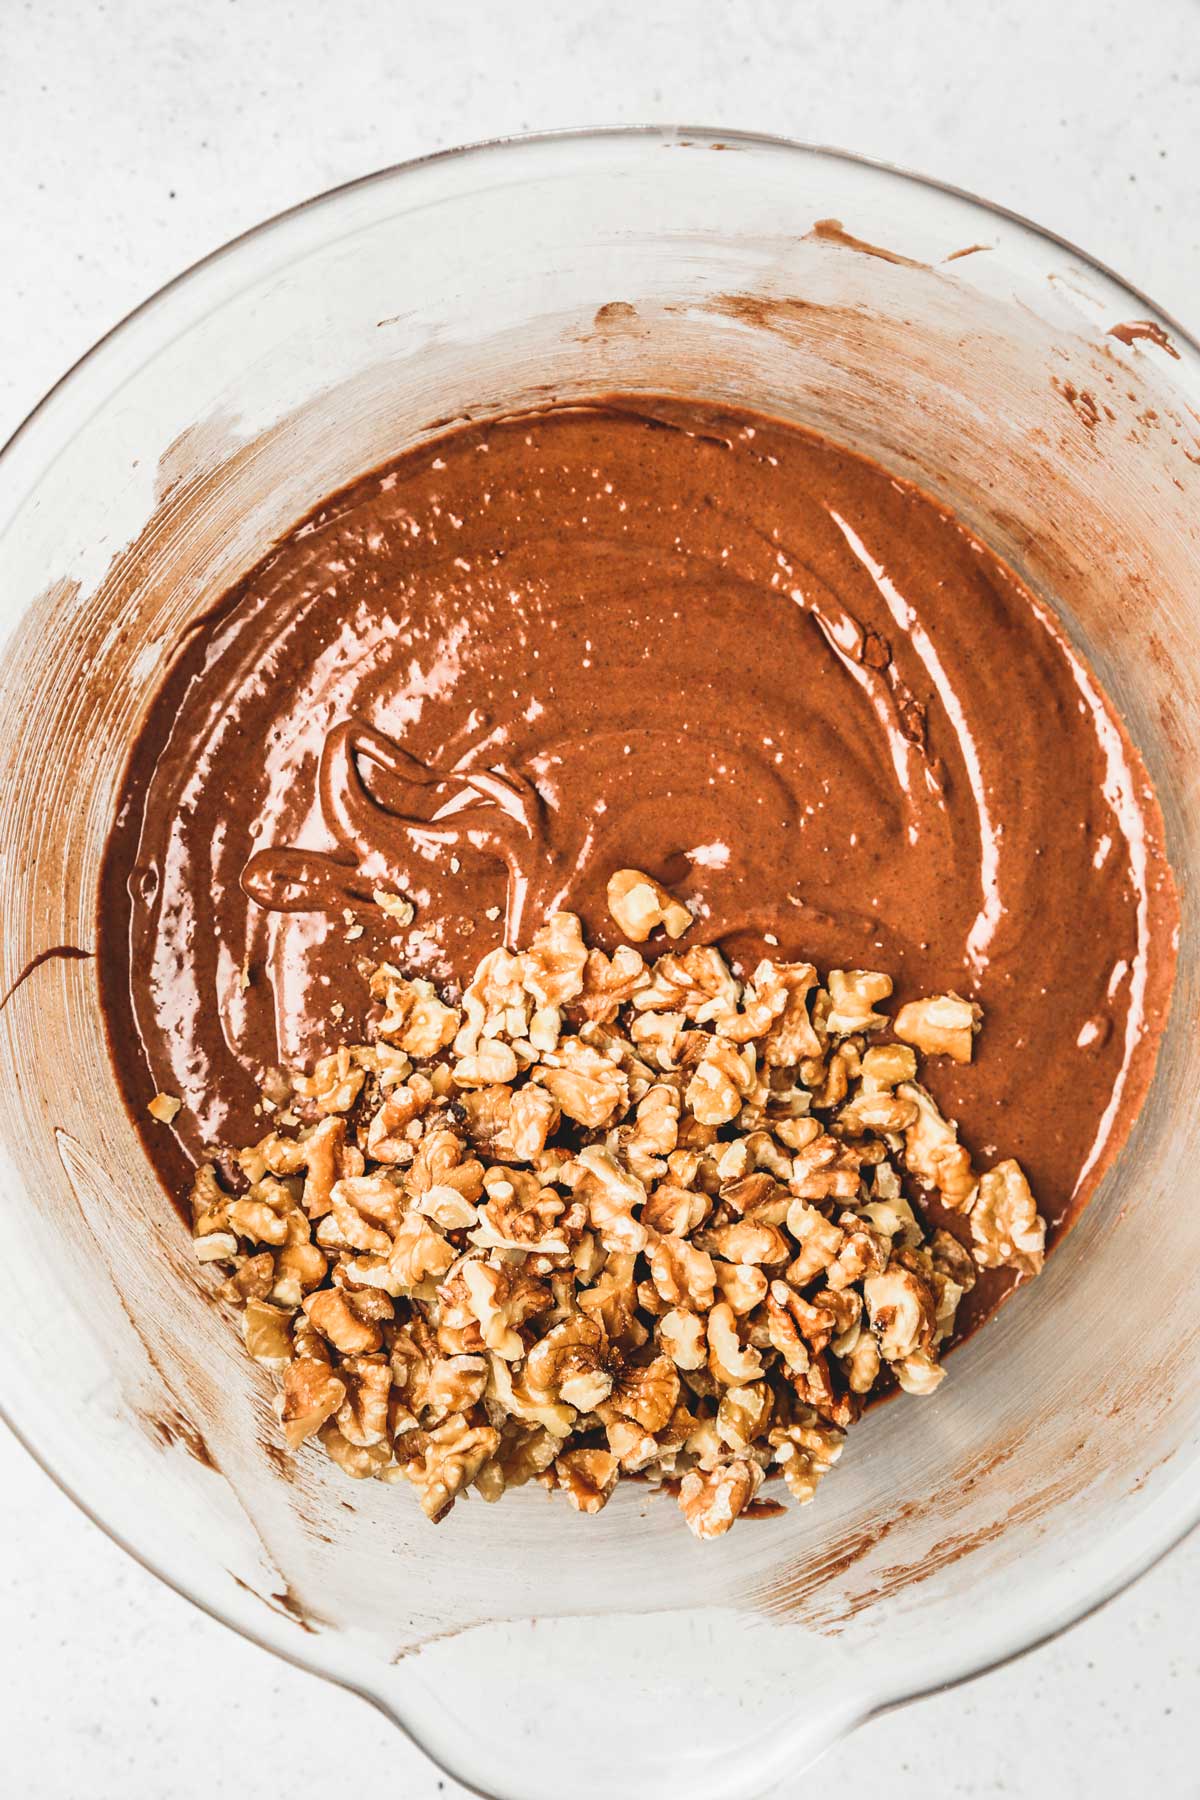 large bowl with chocolate brownies batter an chopped walnut